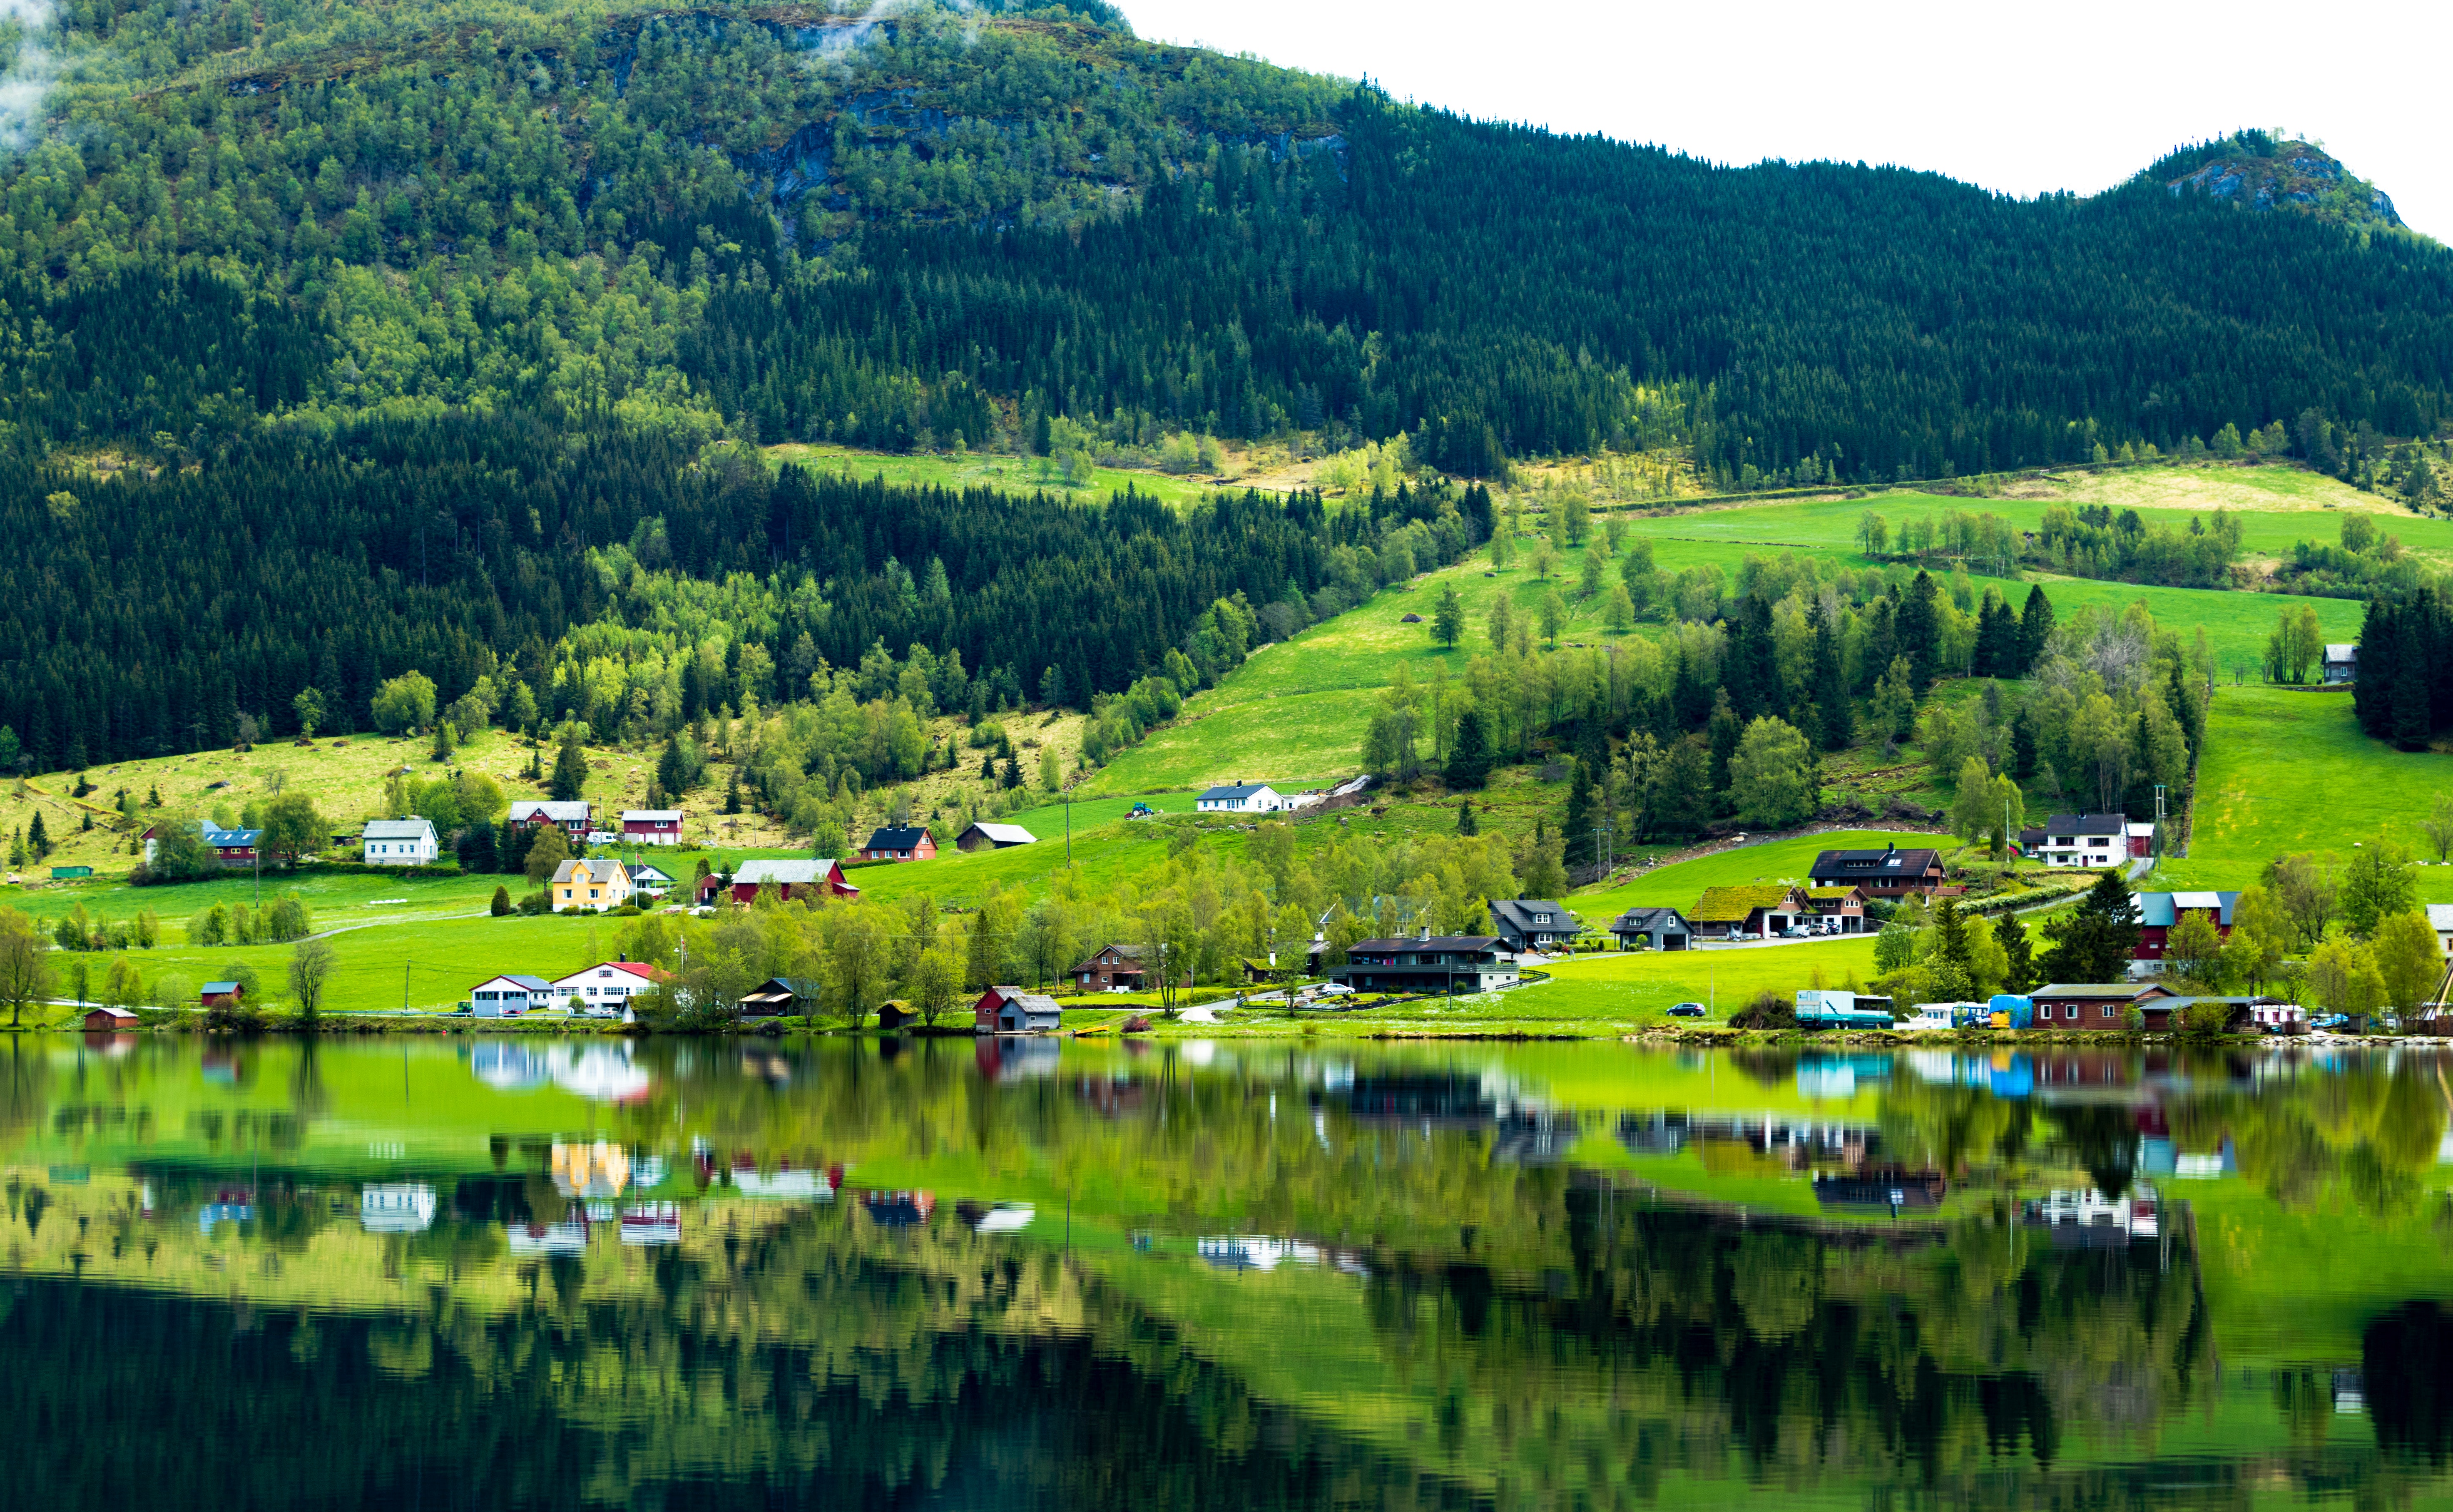 Taking it slow on Norway’s fastest route is a great way to delve into the culture, traditions, and awe-inspiring landscape of this far-flung corner of the world.